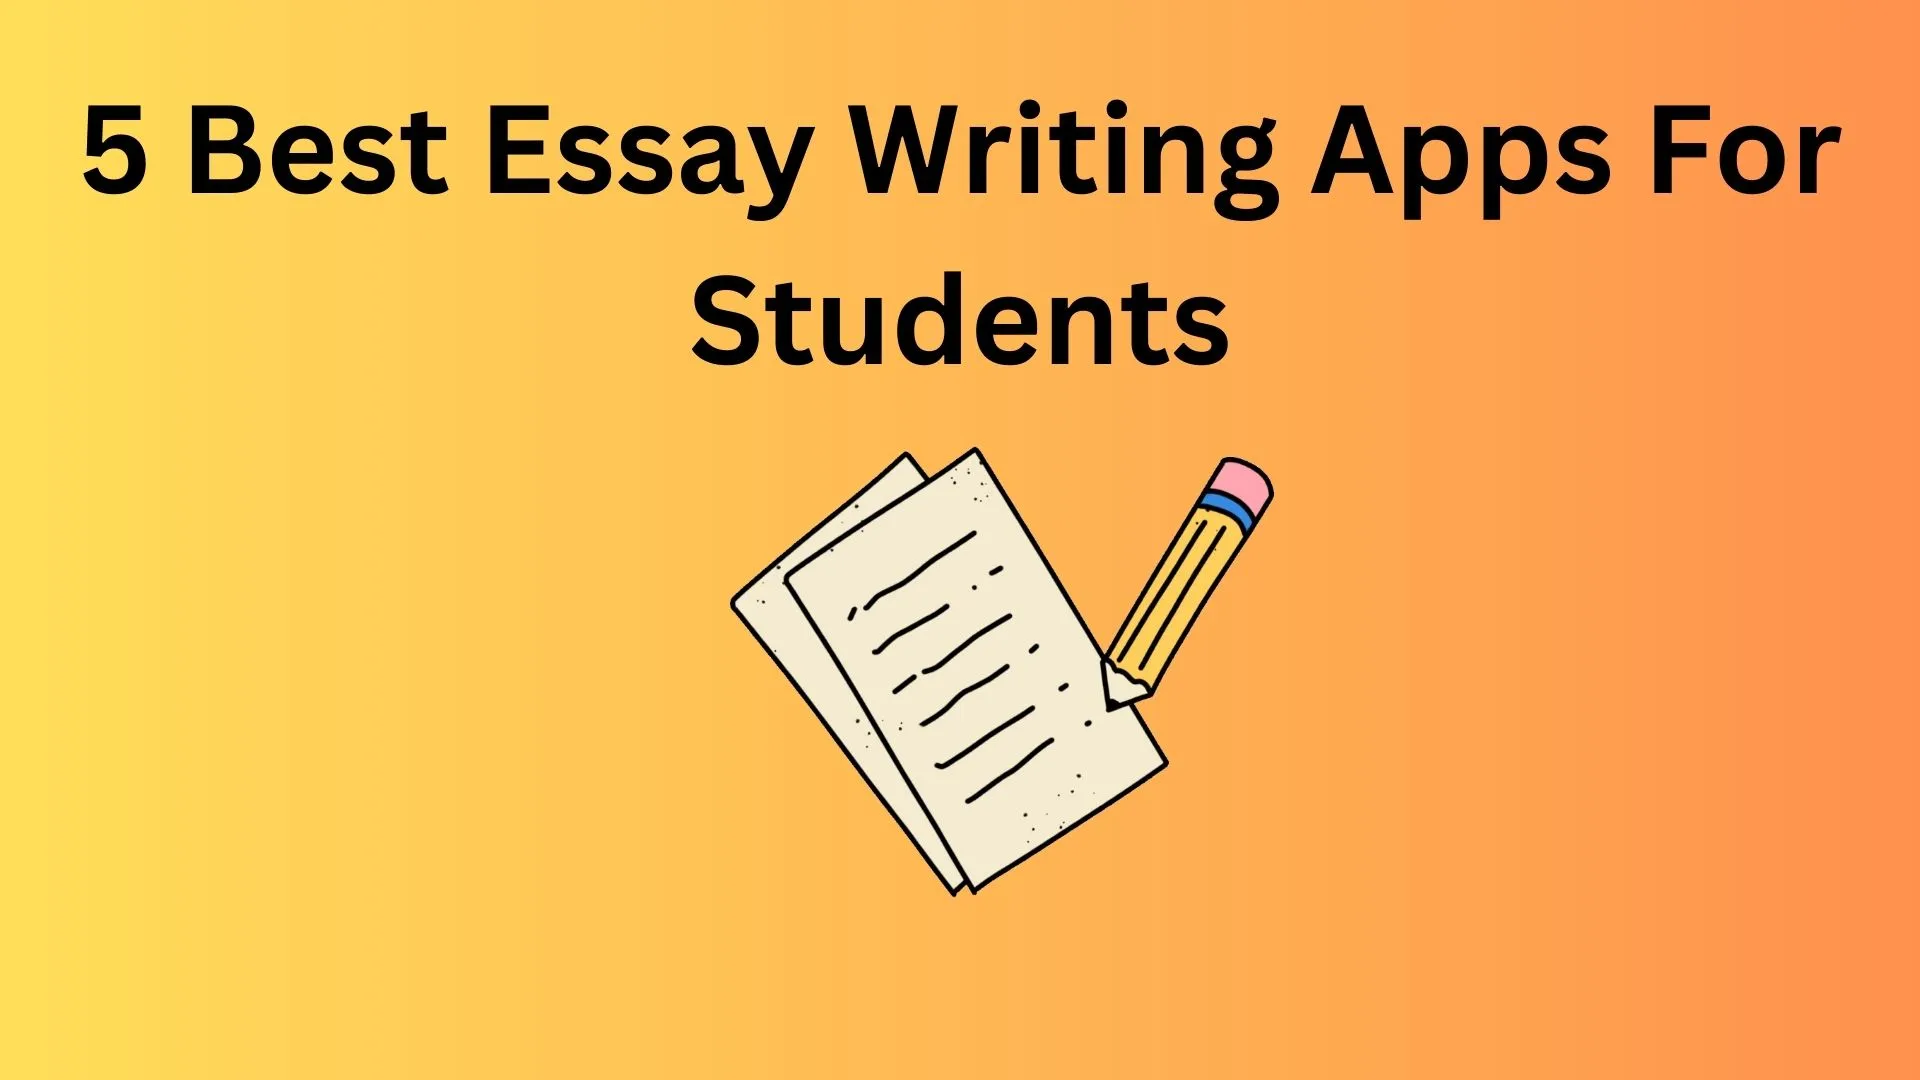 Essay Writing Apps for Students and Academics